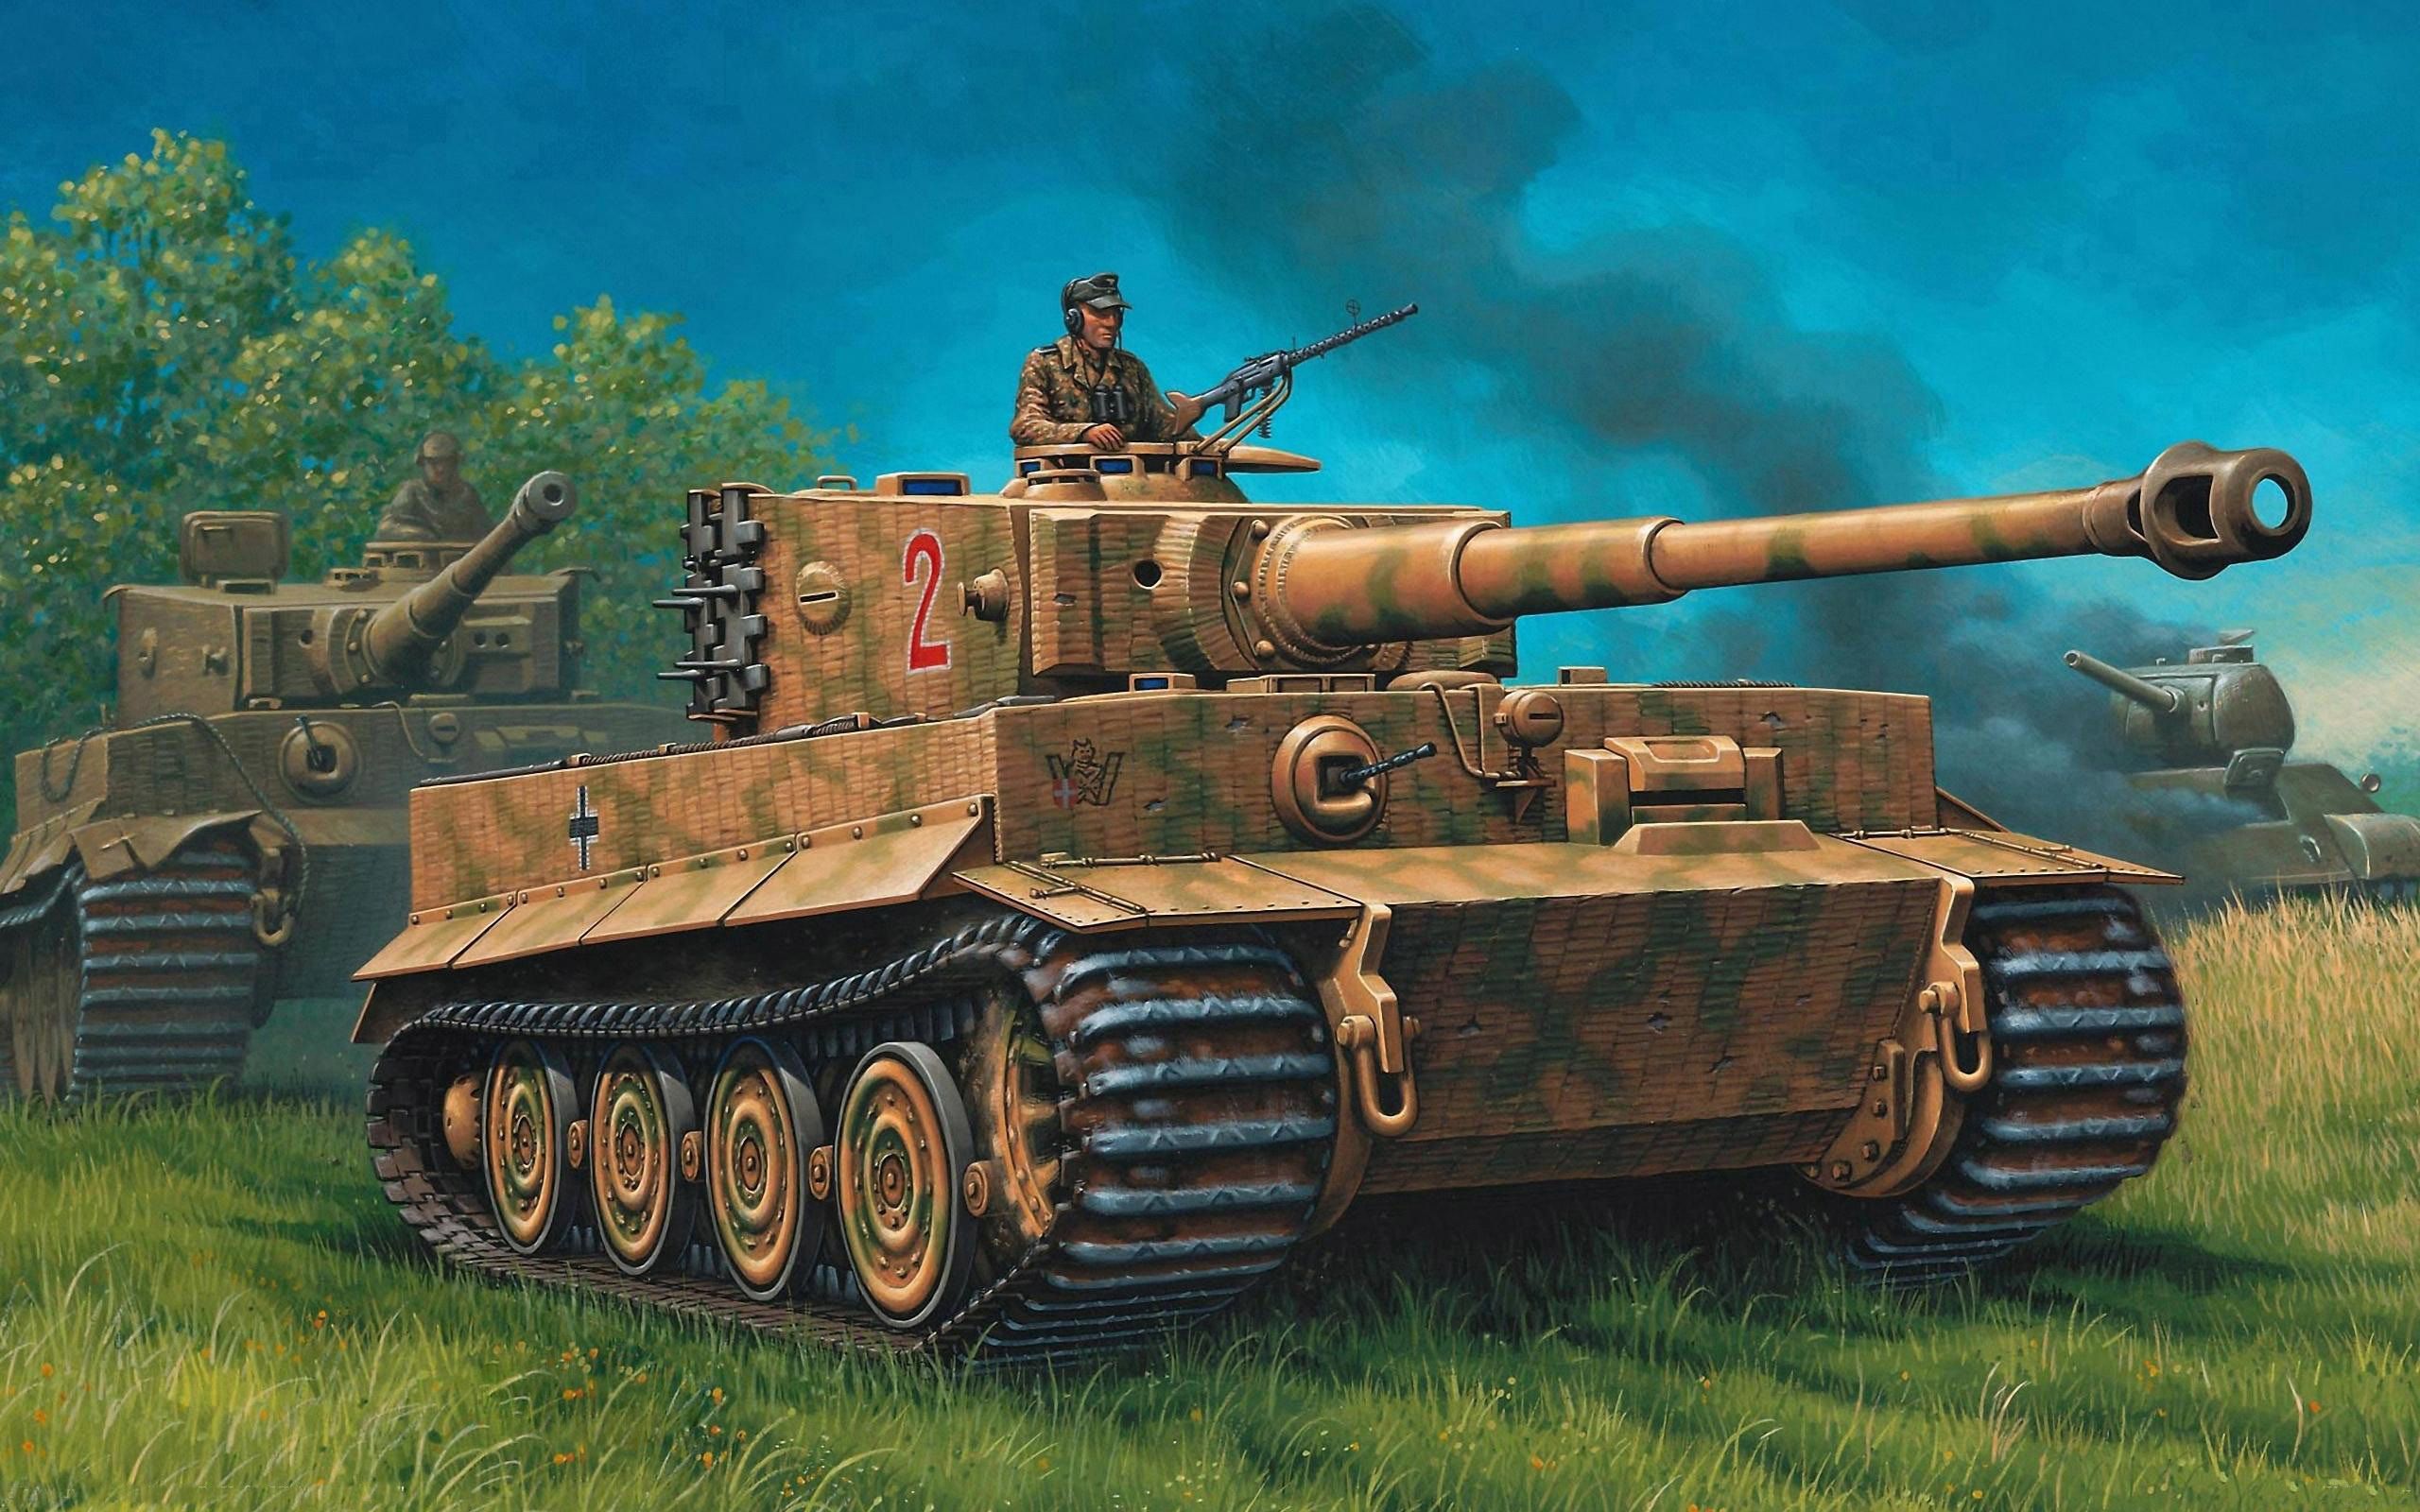 Jagdpanther Wallpaper. Jagdpanther Wallpaper, Jagdpanther WOT Wallpaper and